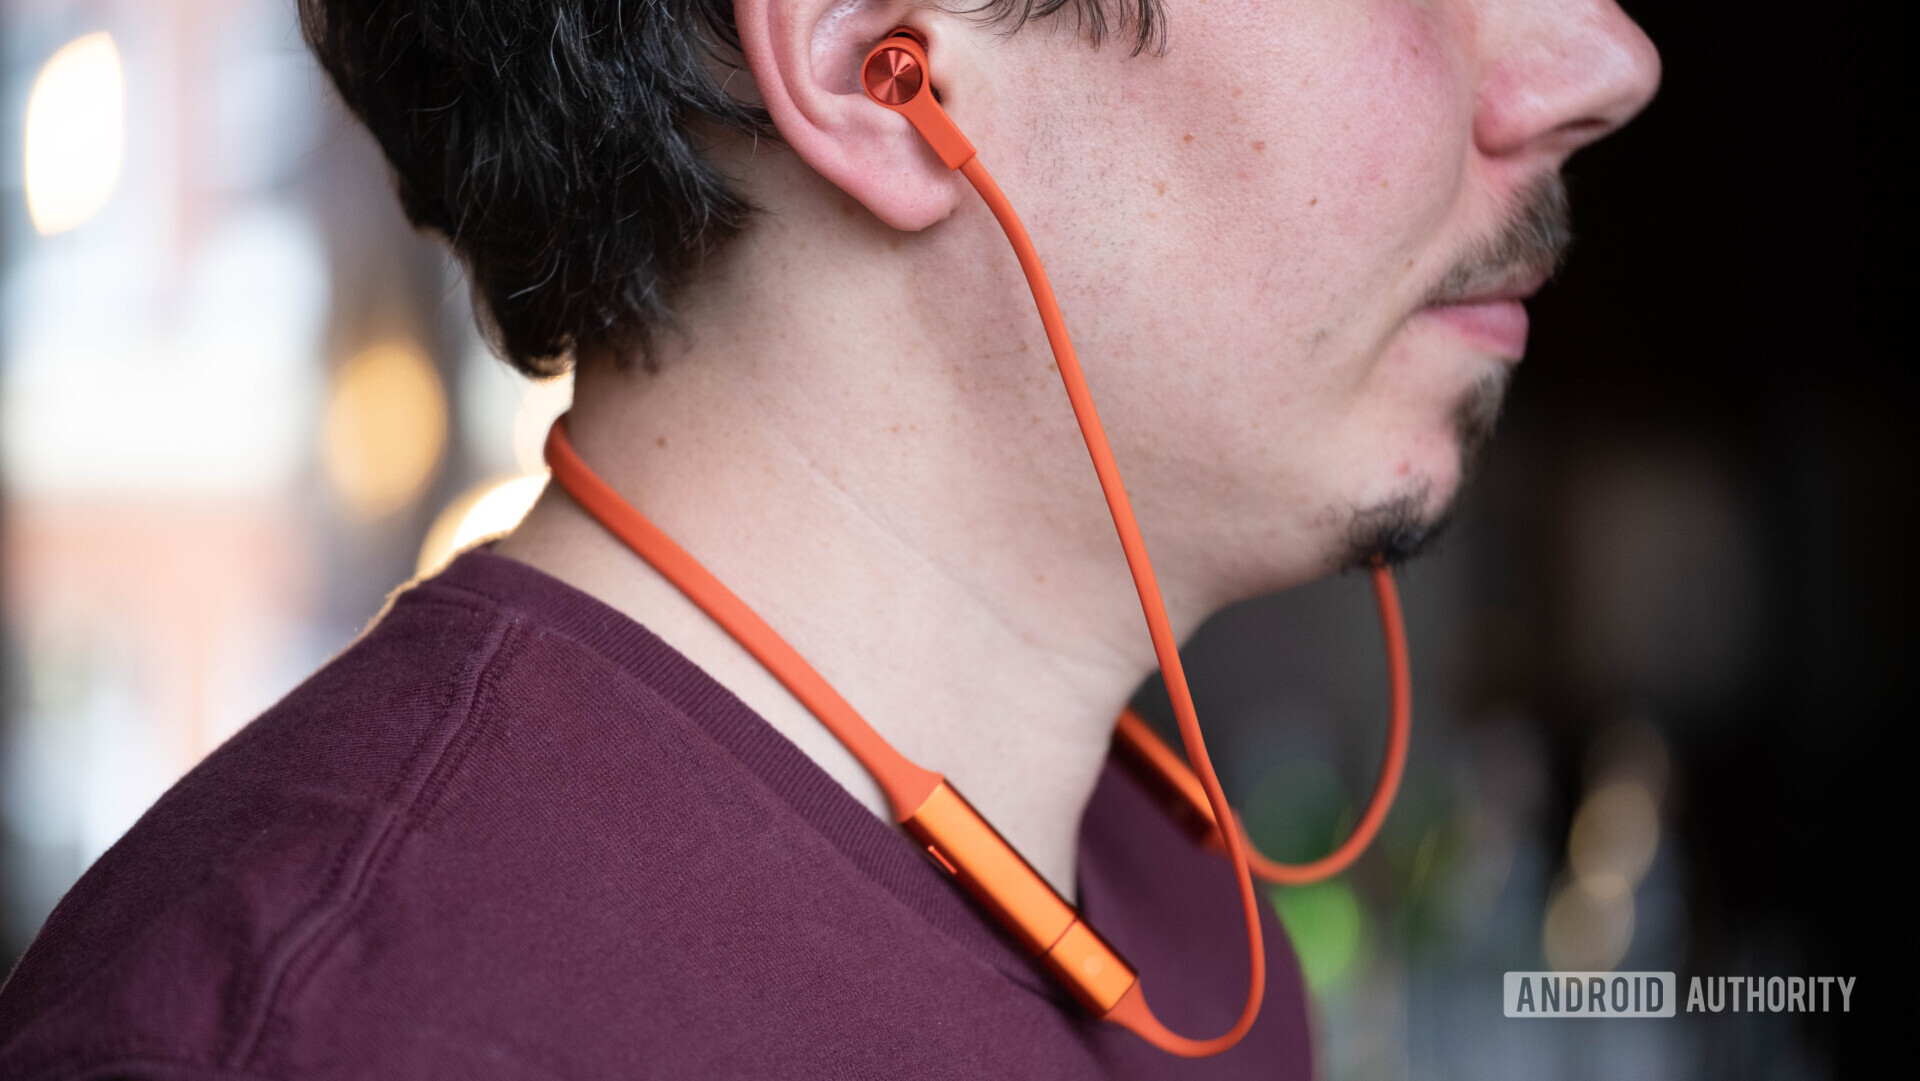 Profile of a man wearing the Huawei Freelace earbuds.